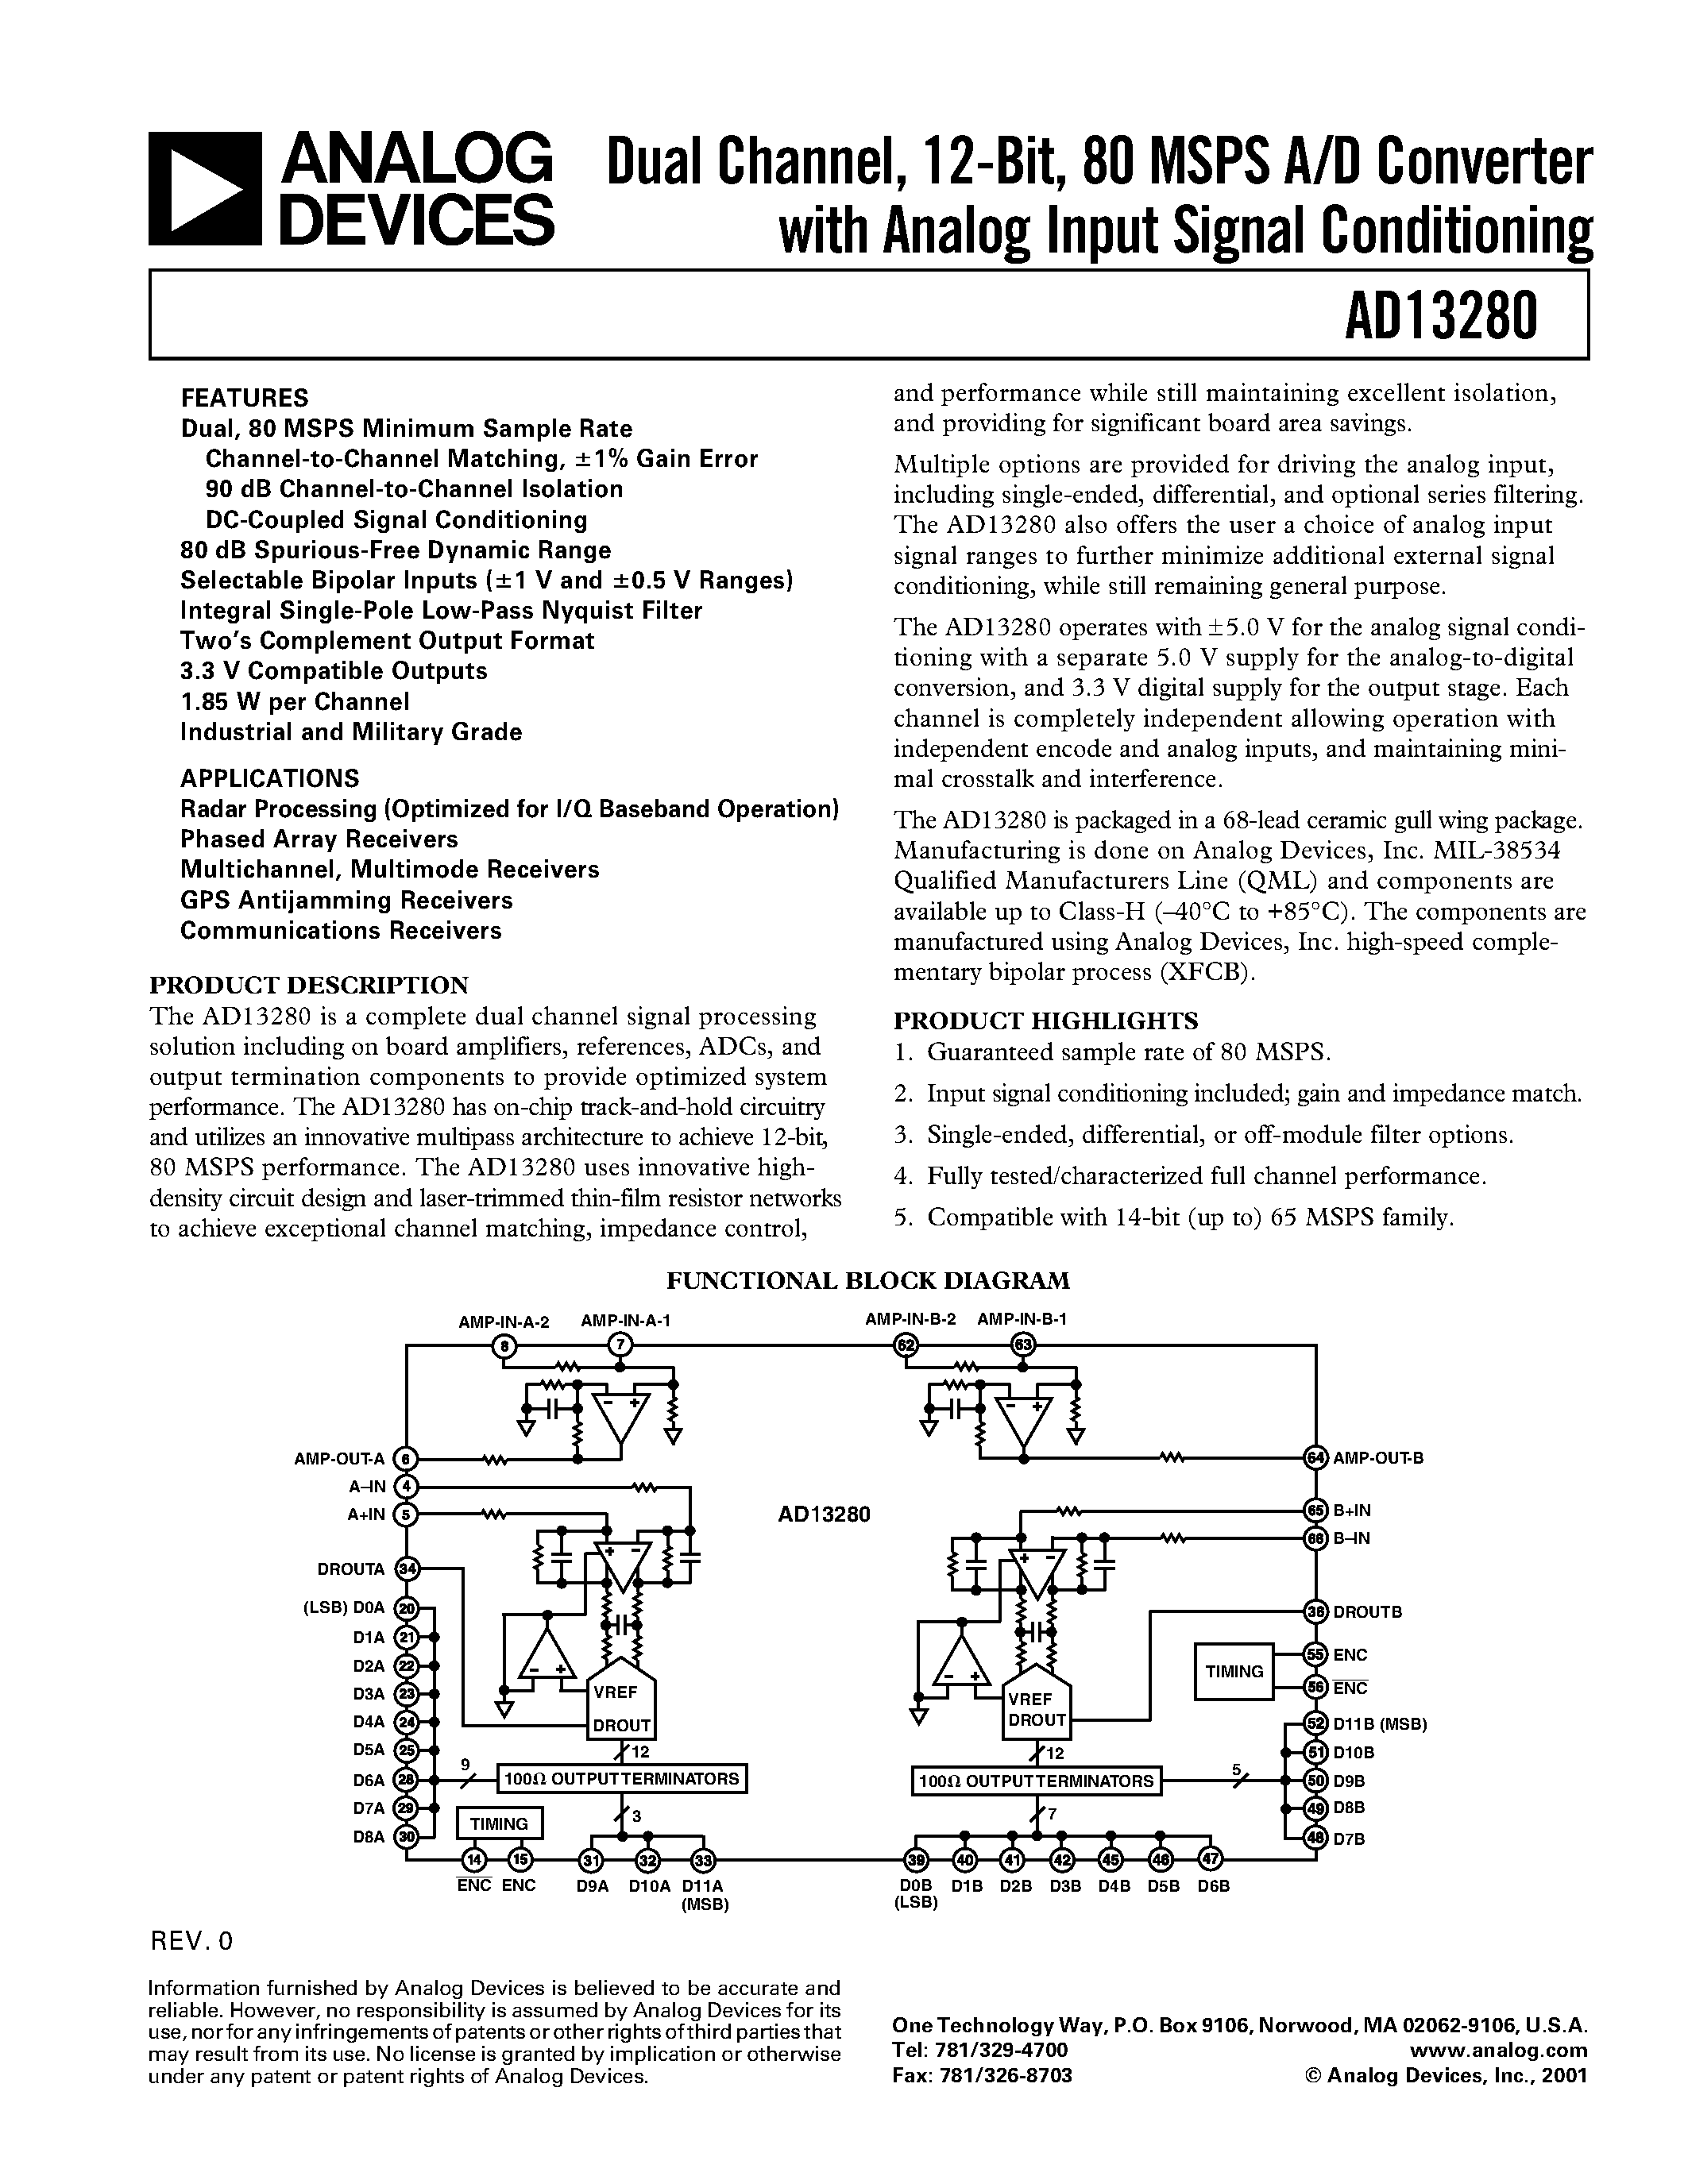 Даташит AD13280AF - Dual Channel/ 12-Bit/ 80 MSPS A/D Converter with Analog Input Signal Conditioning страница 1